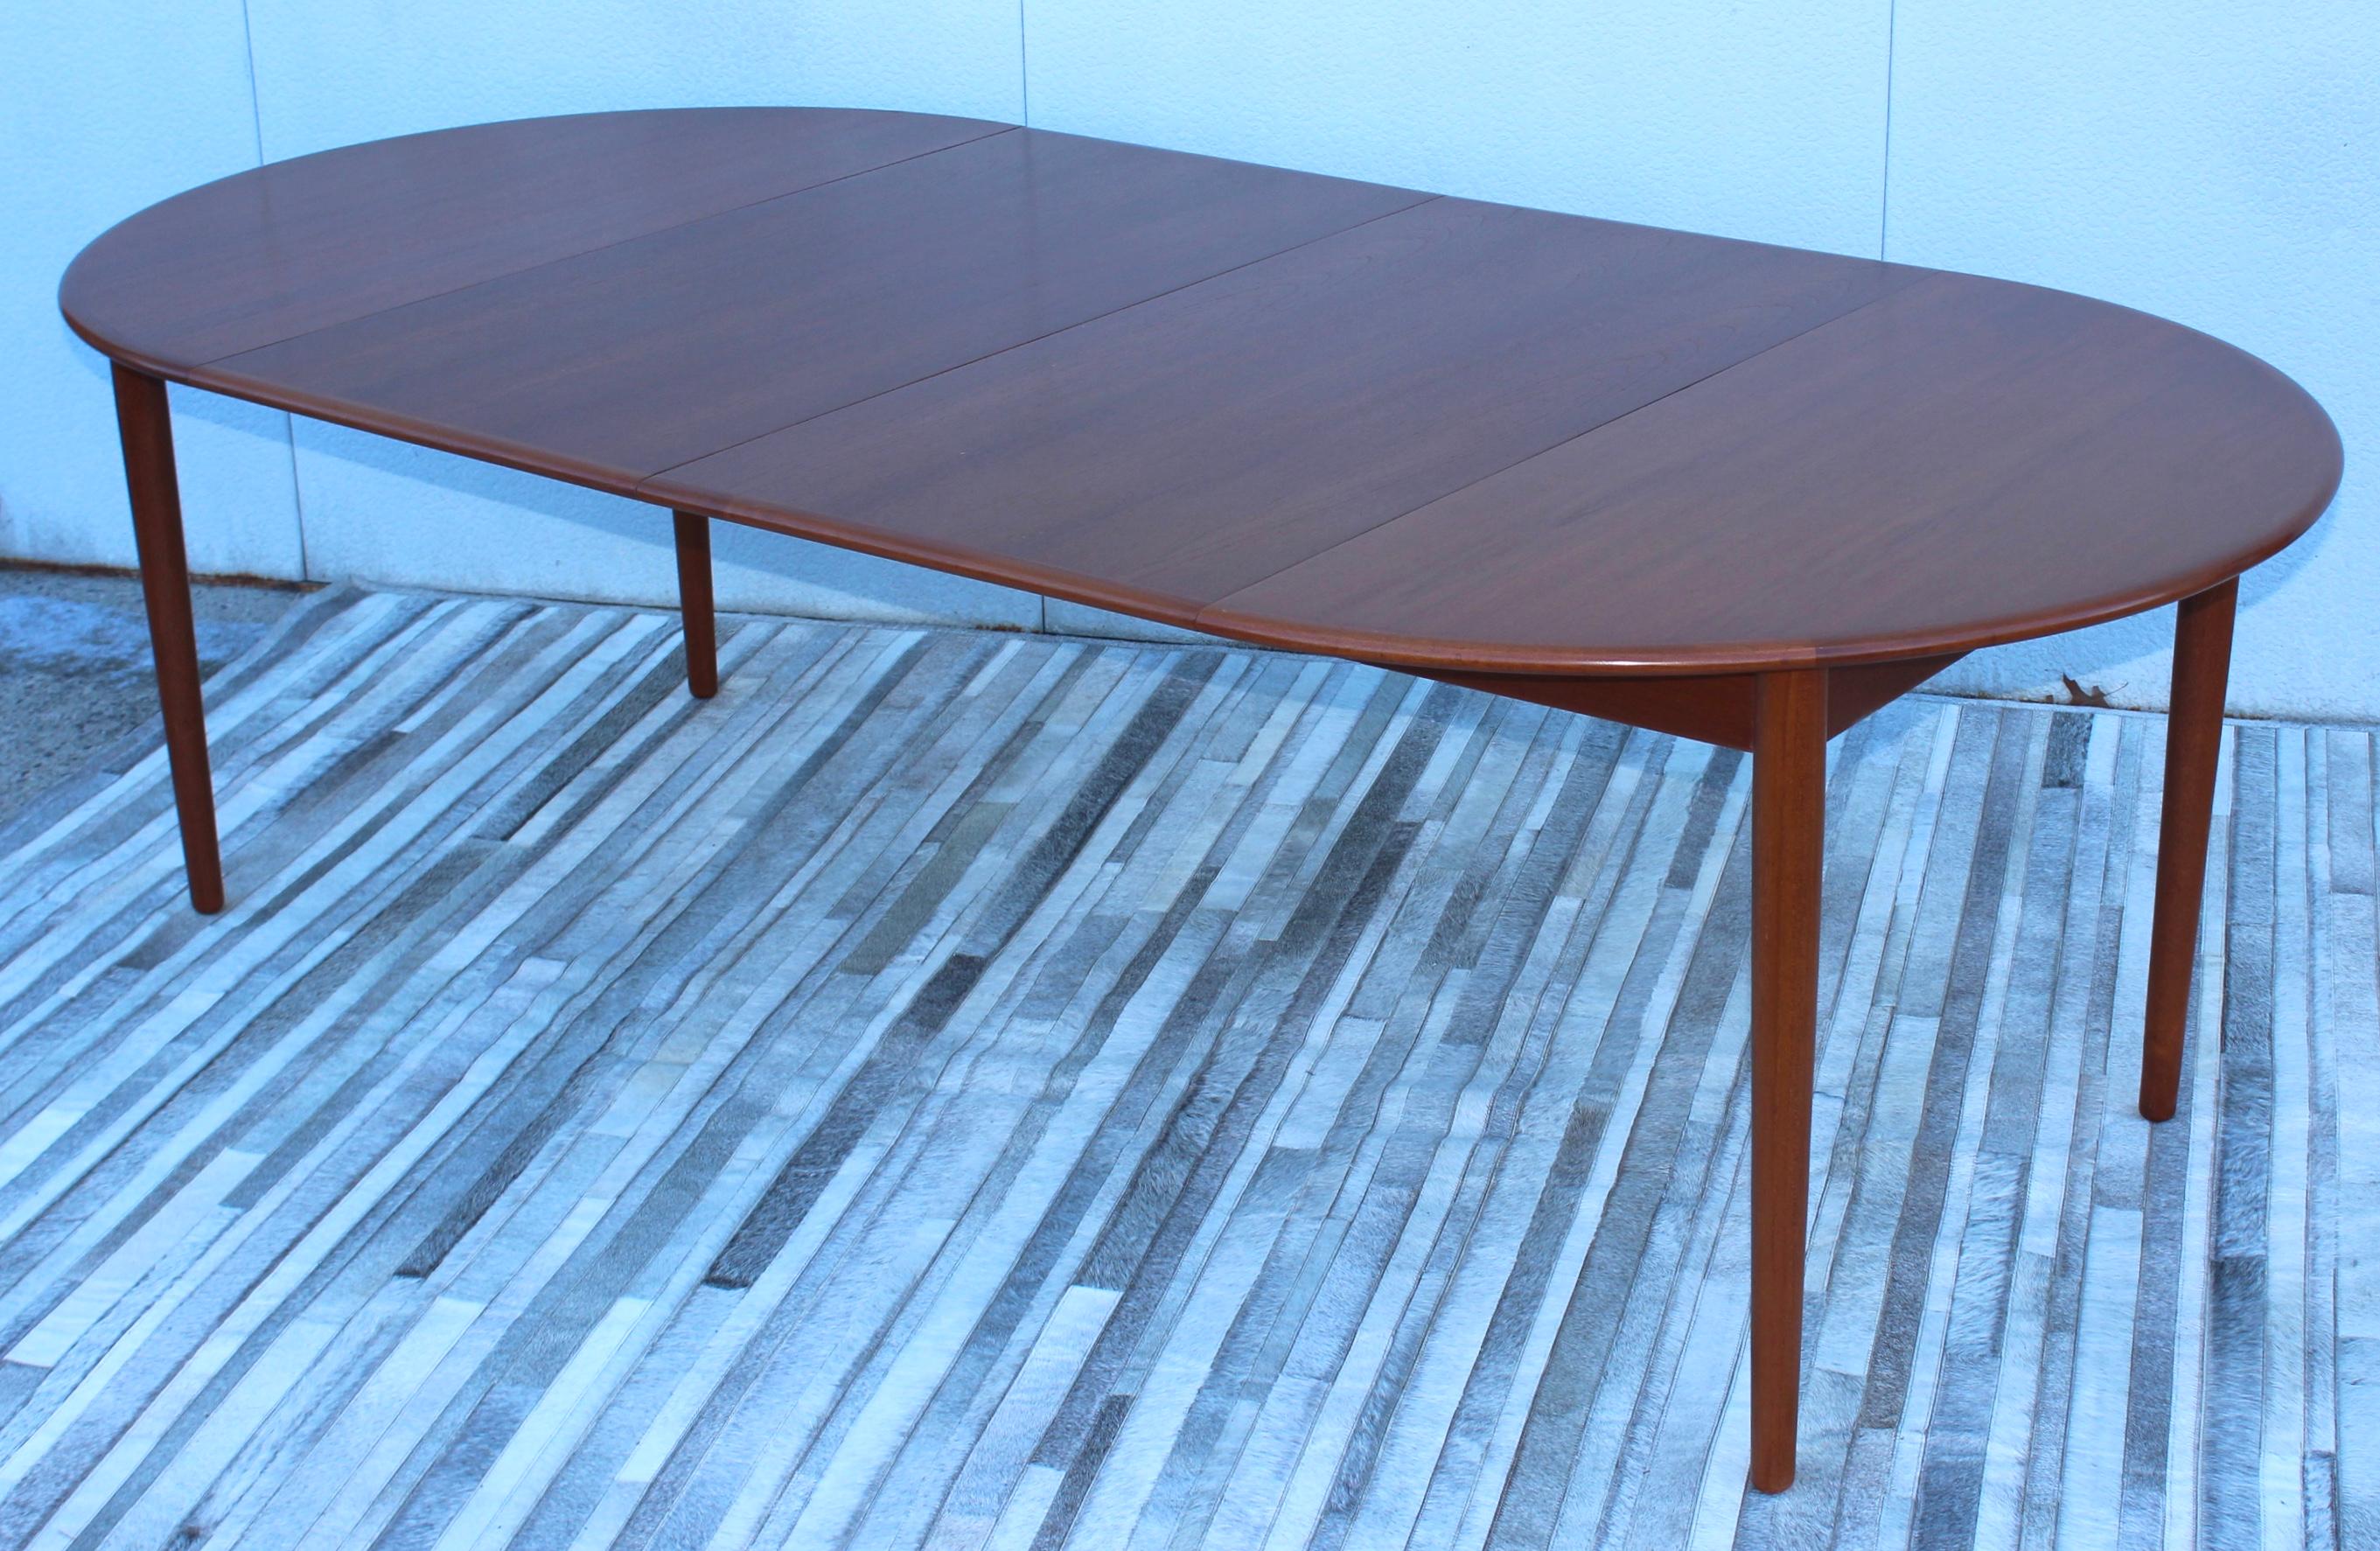 1960's Mid-Century Modern Danish Teak Round Dining Table with Two Leaves 7